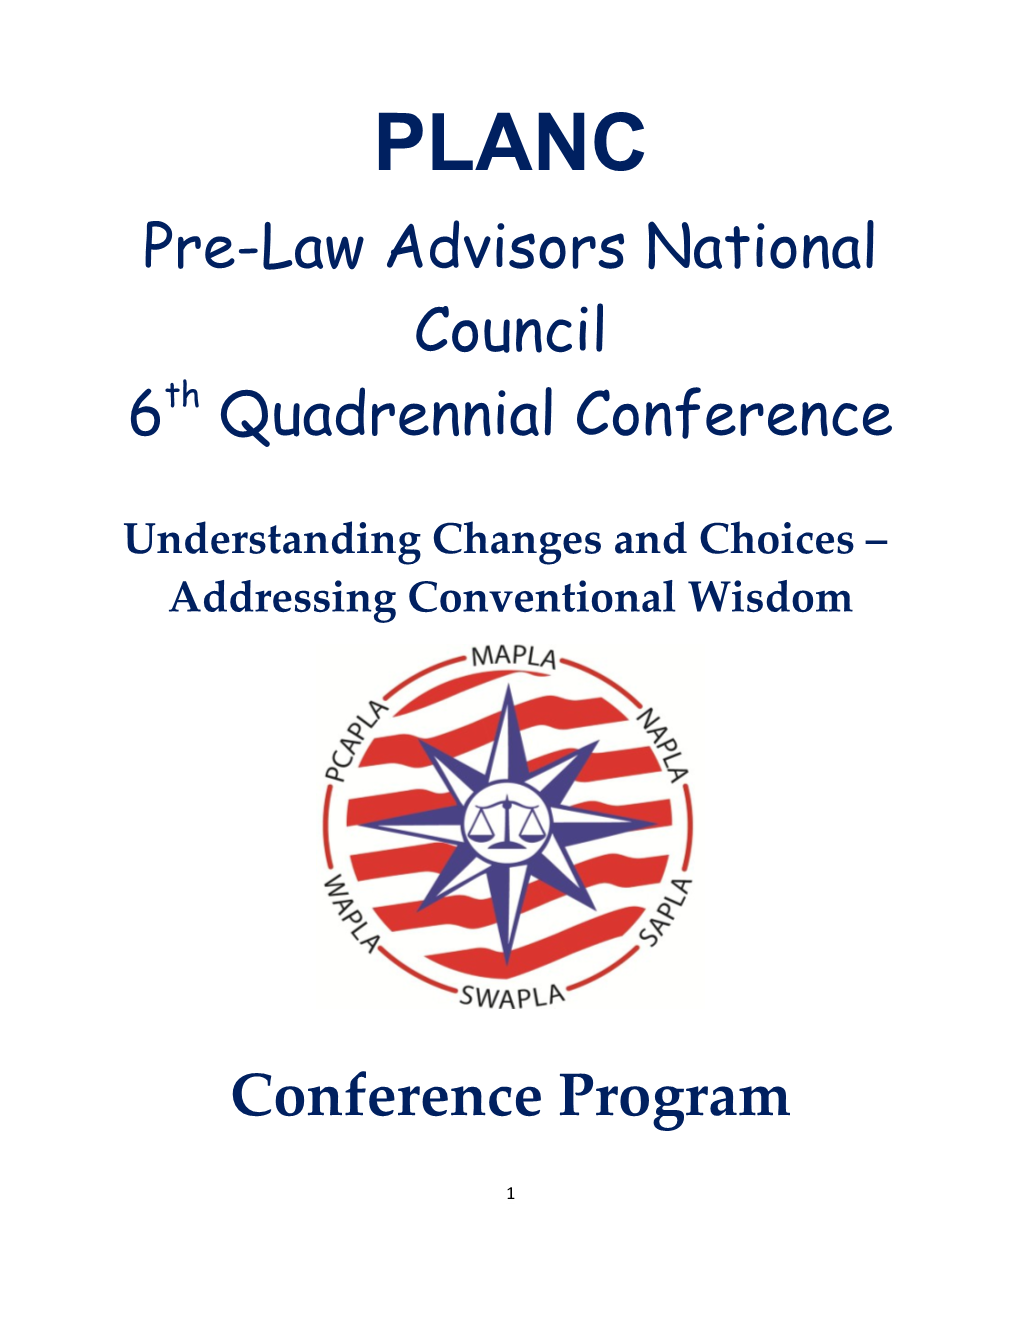 Pre-Law Advisors National Council